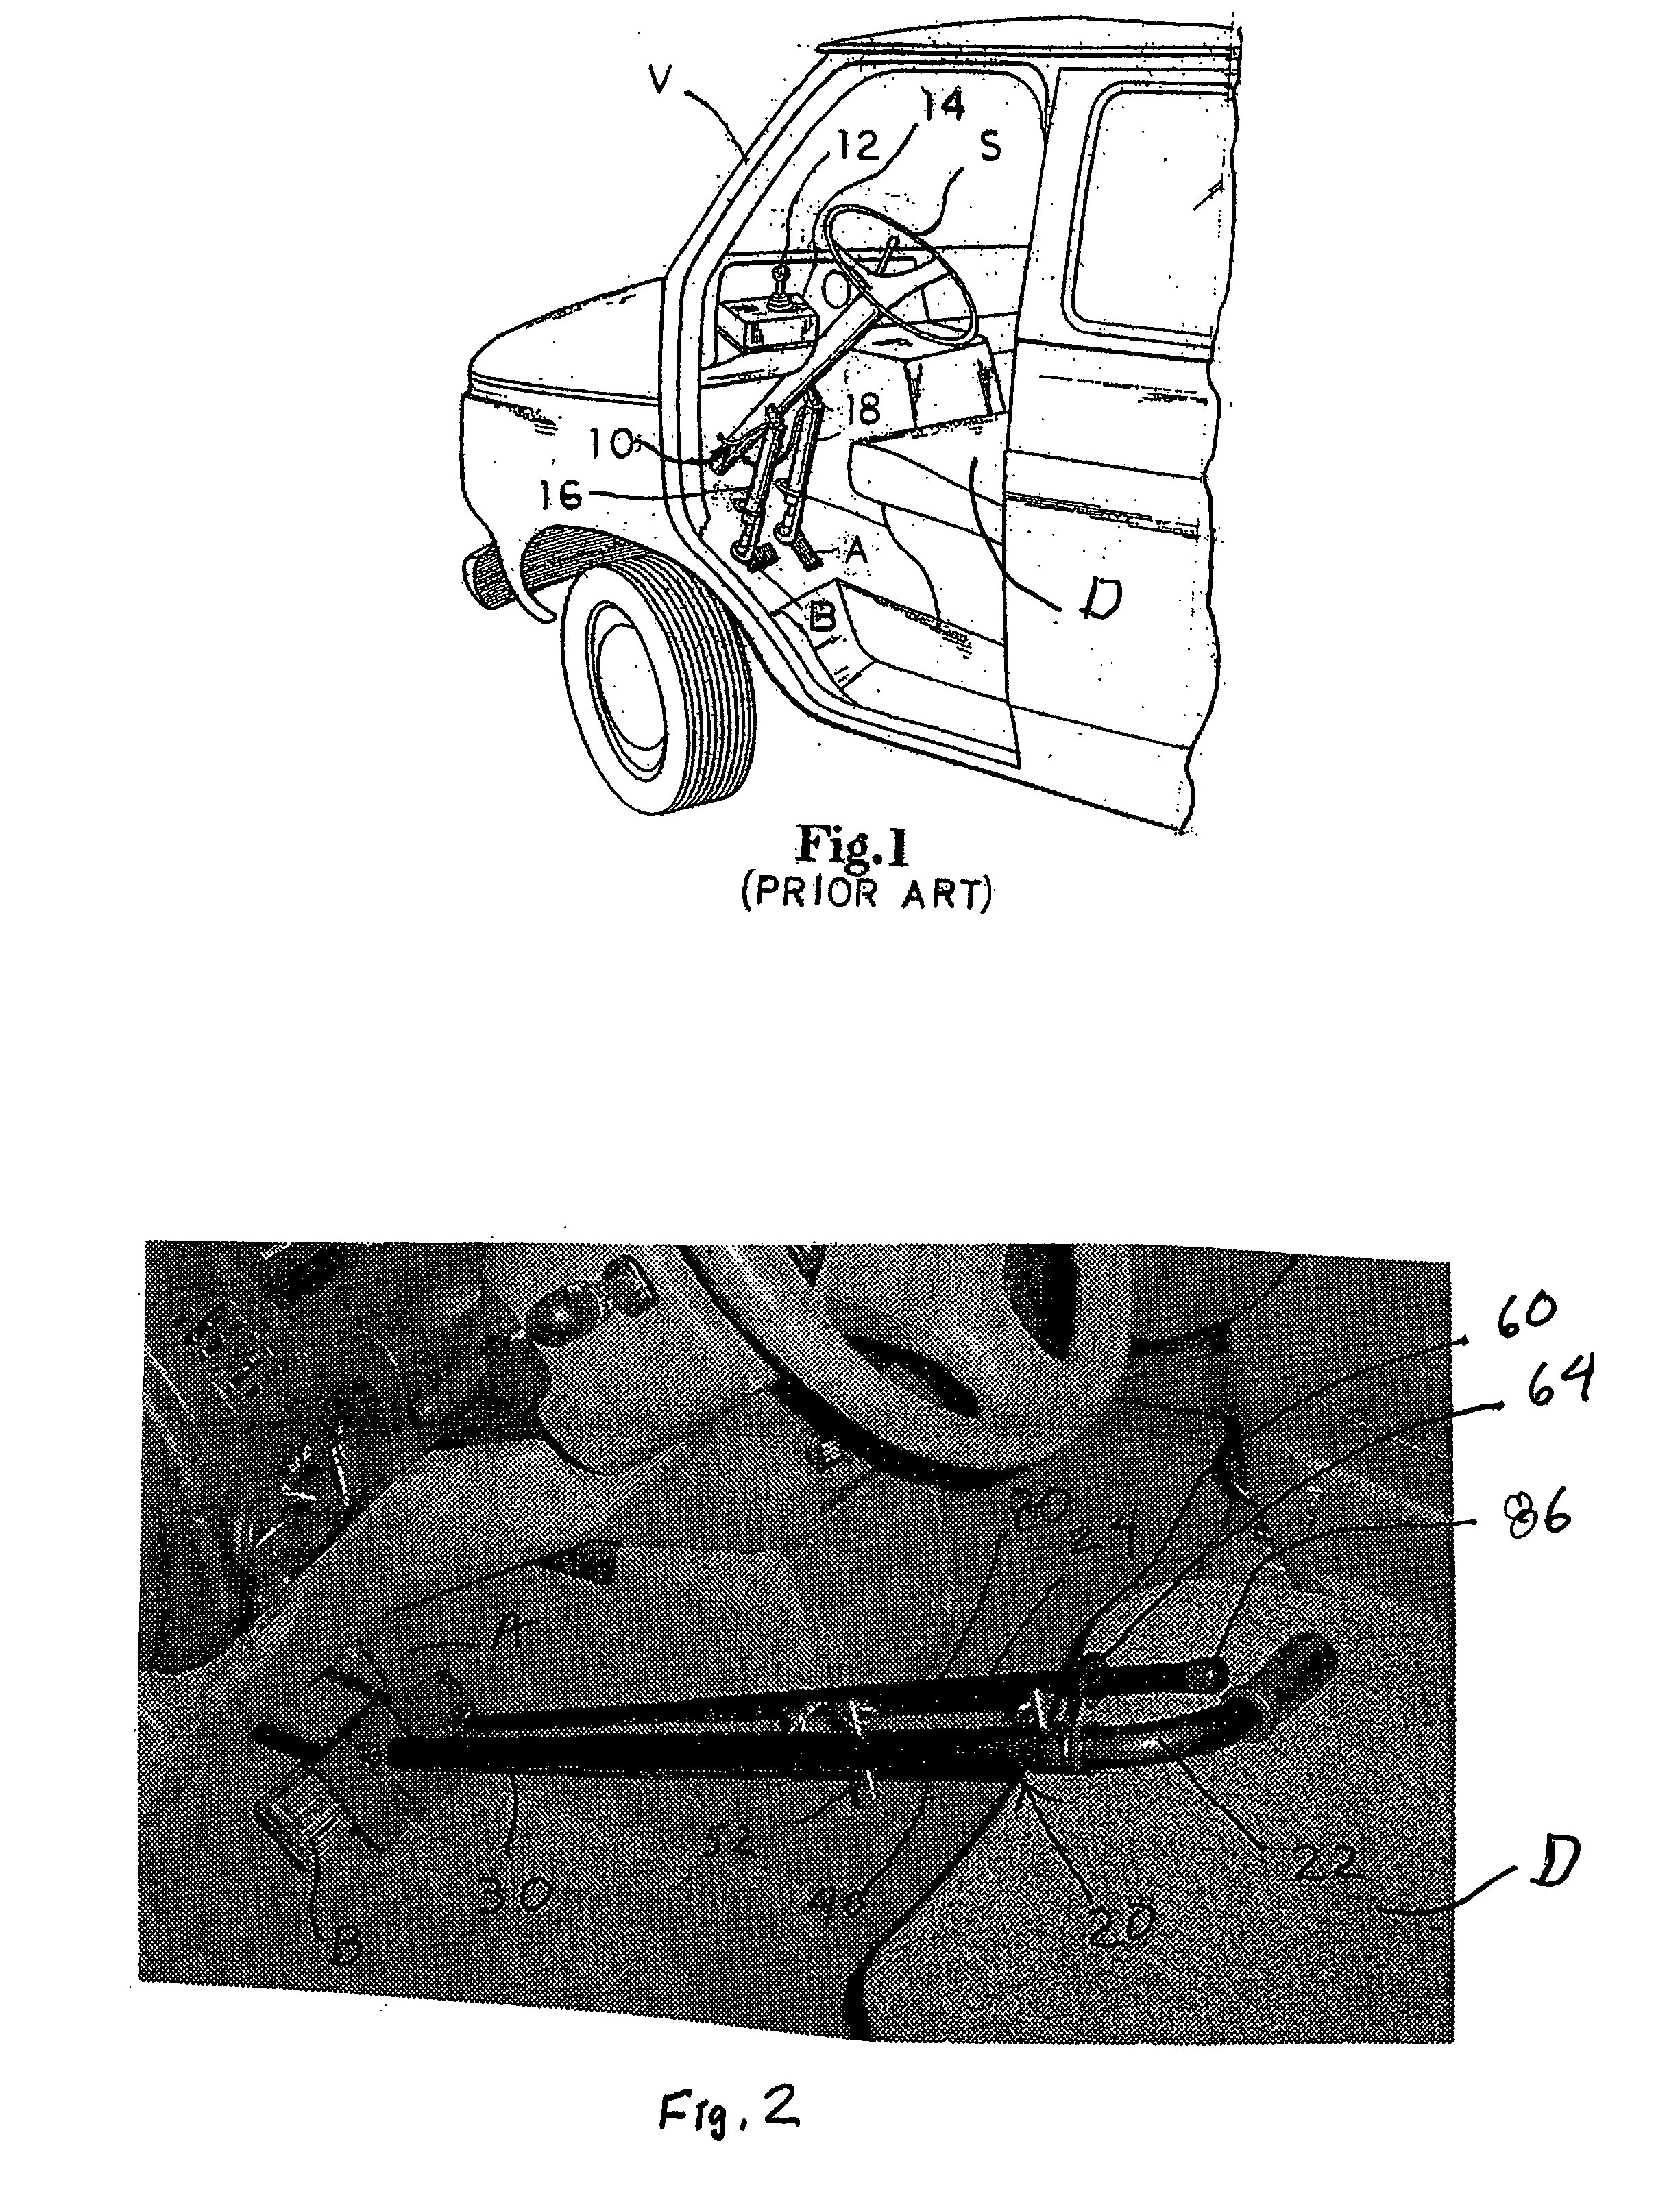 Portable hand control system for a vehicle